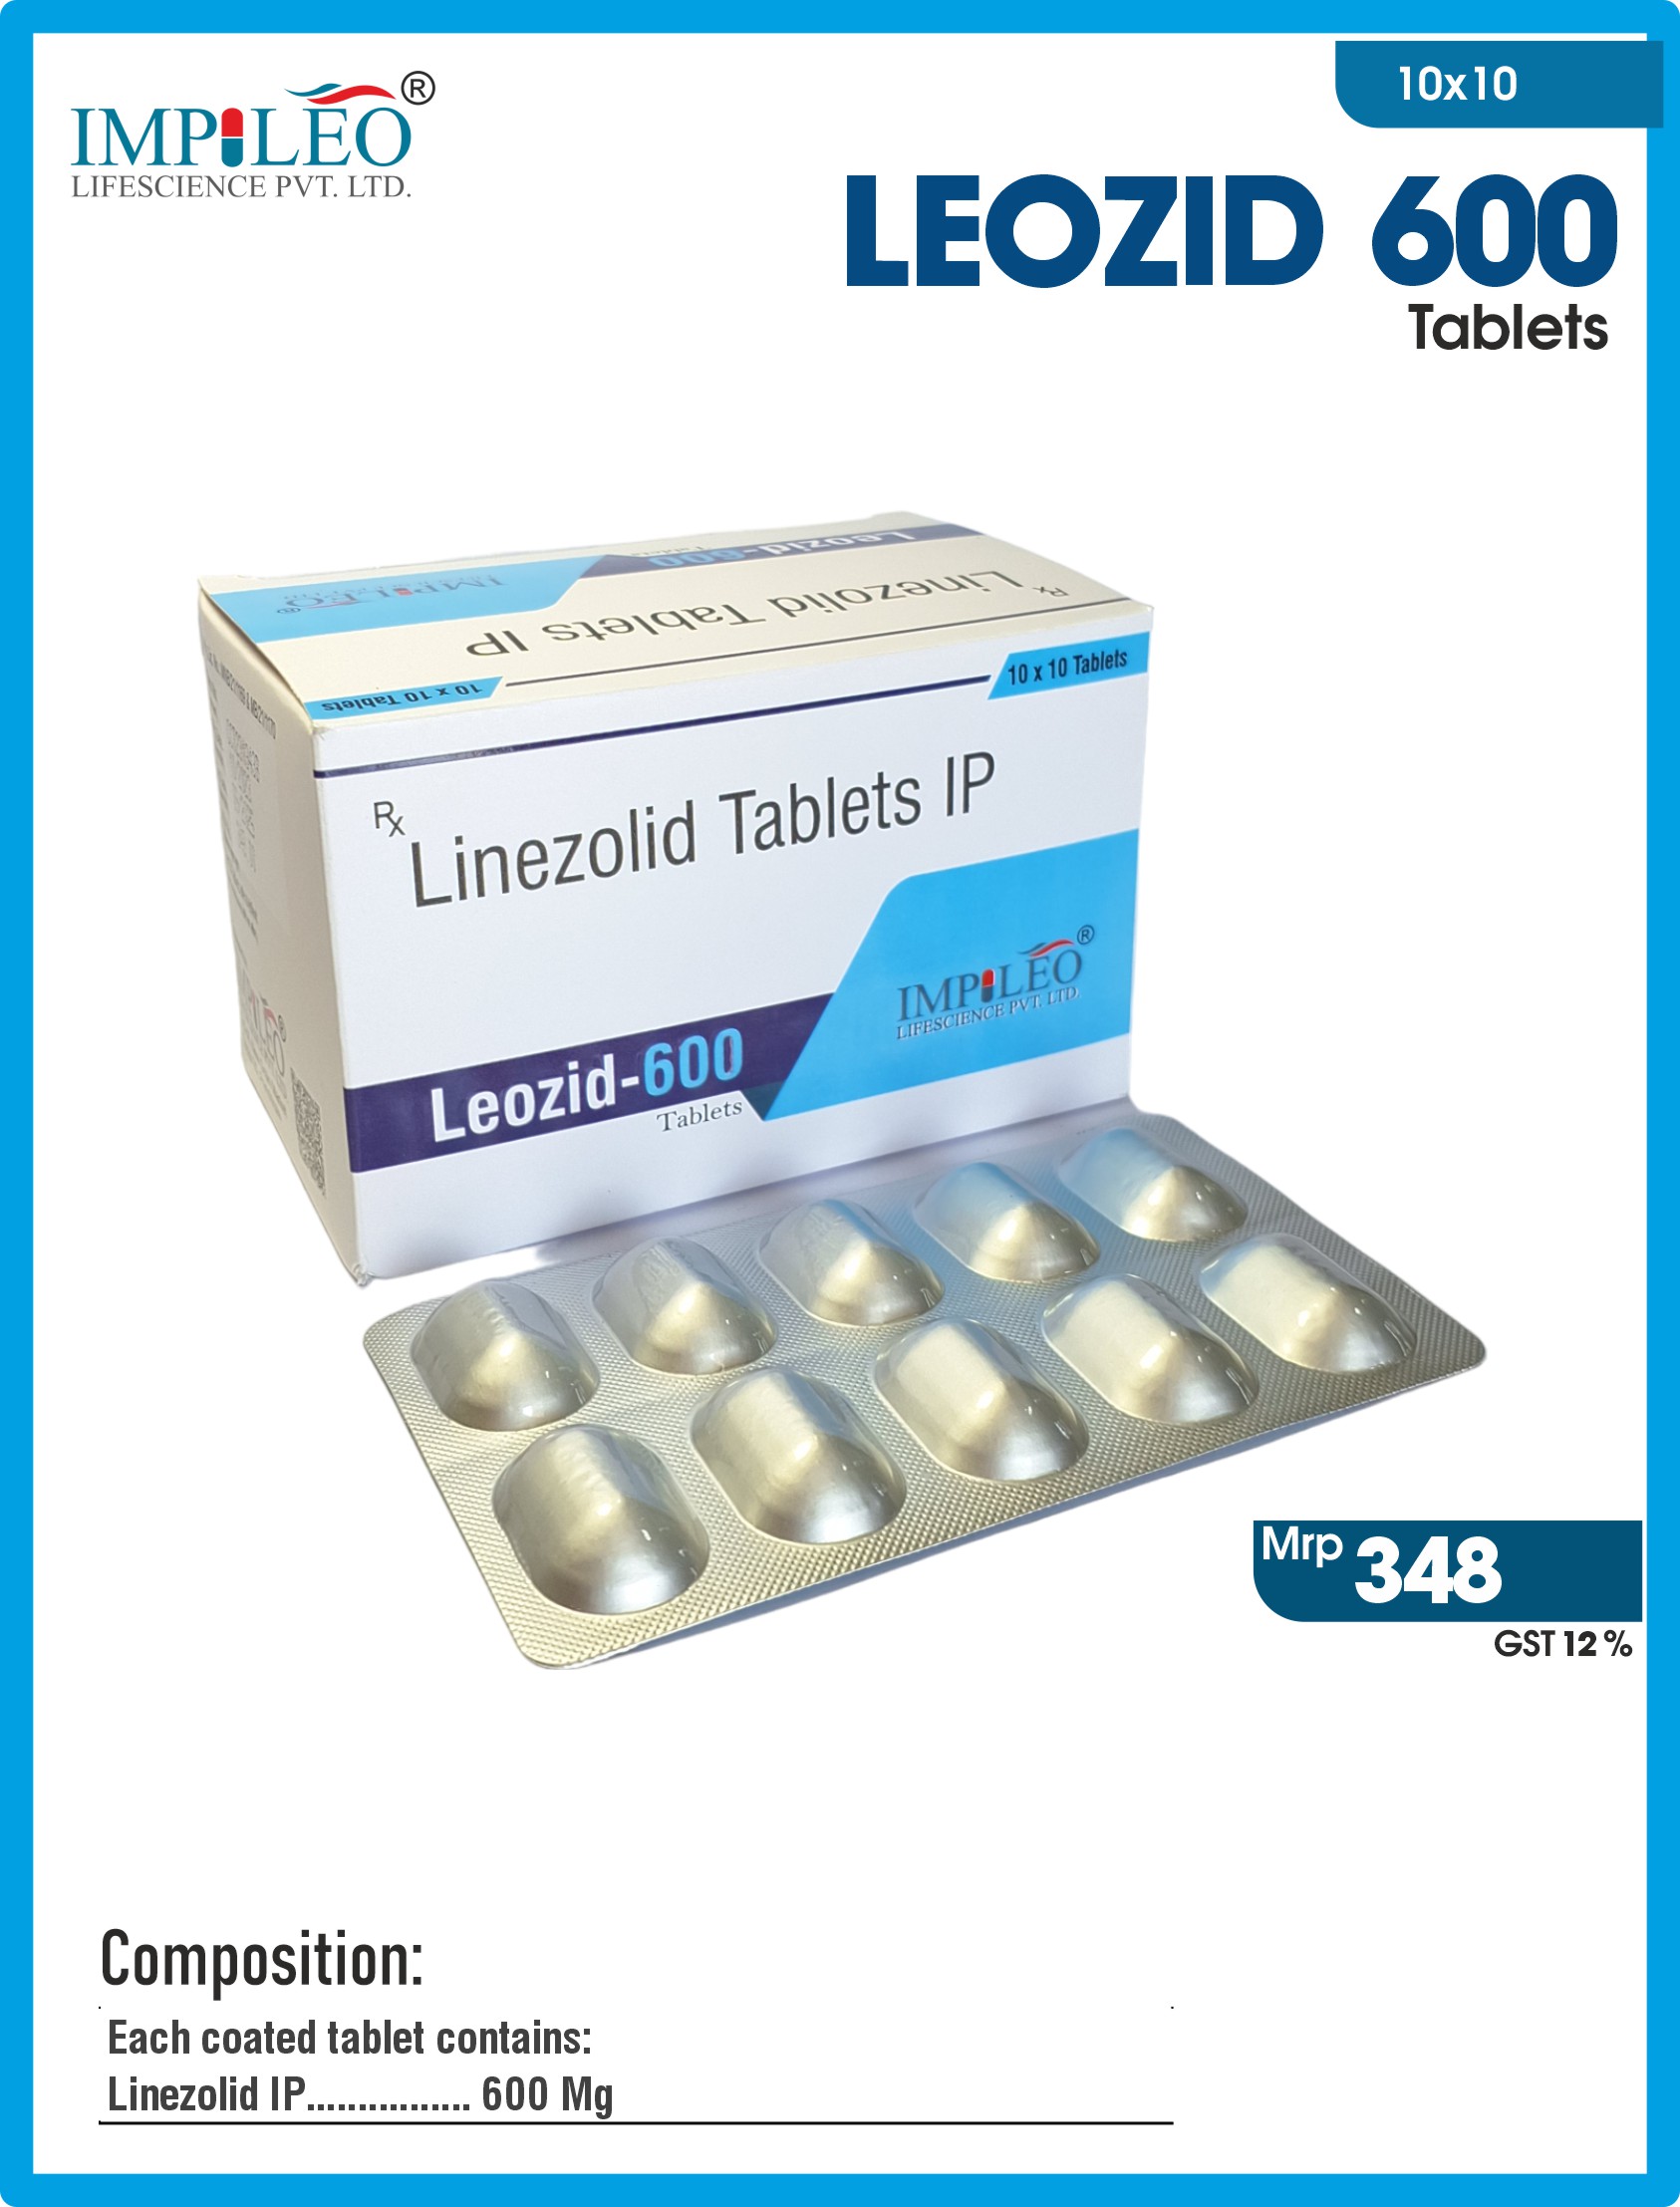 Quality Assured : LEOZID 600 (Linezolid) Tablets from Trusted PCD Pharma Franchise in India